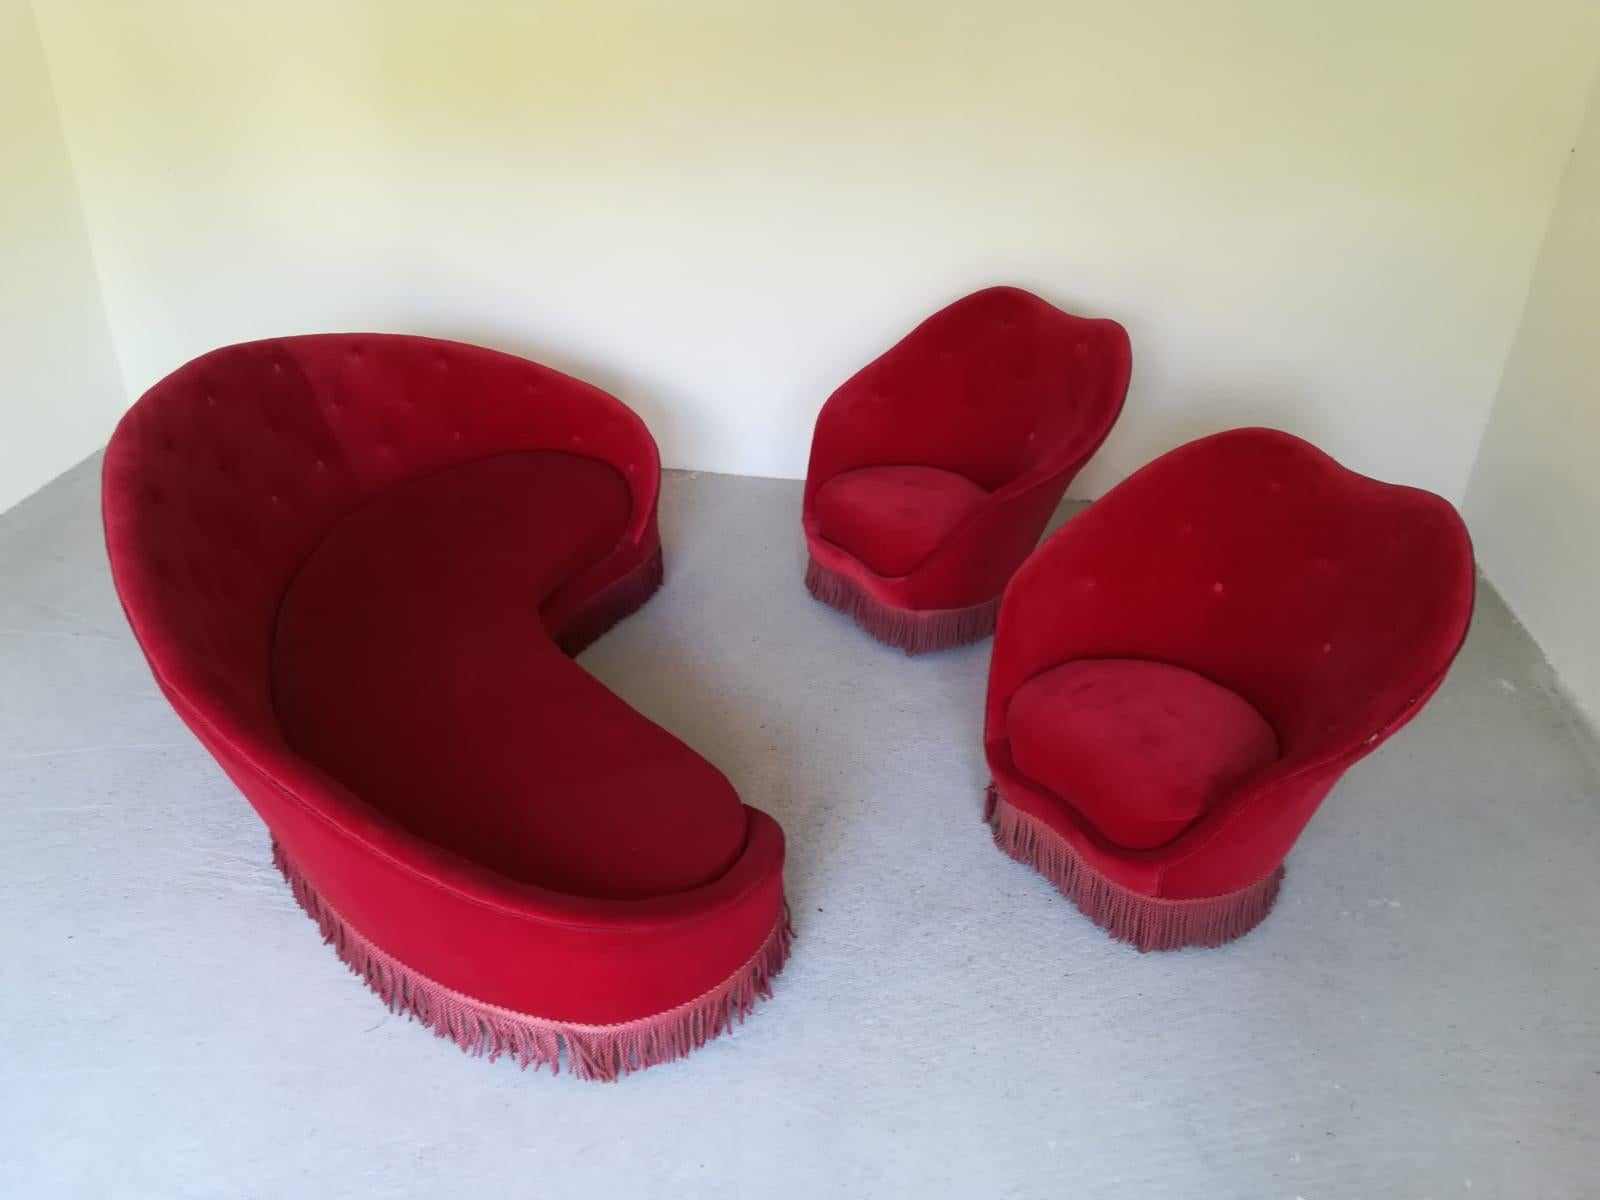 Italian Curvy Comma Armchairs Attr. Ico Parisi, 1950s, Italy, Complimentary Reupholstery